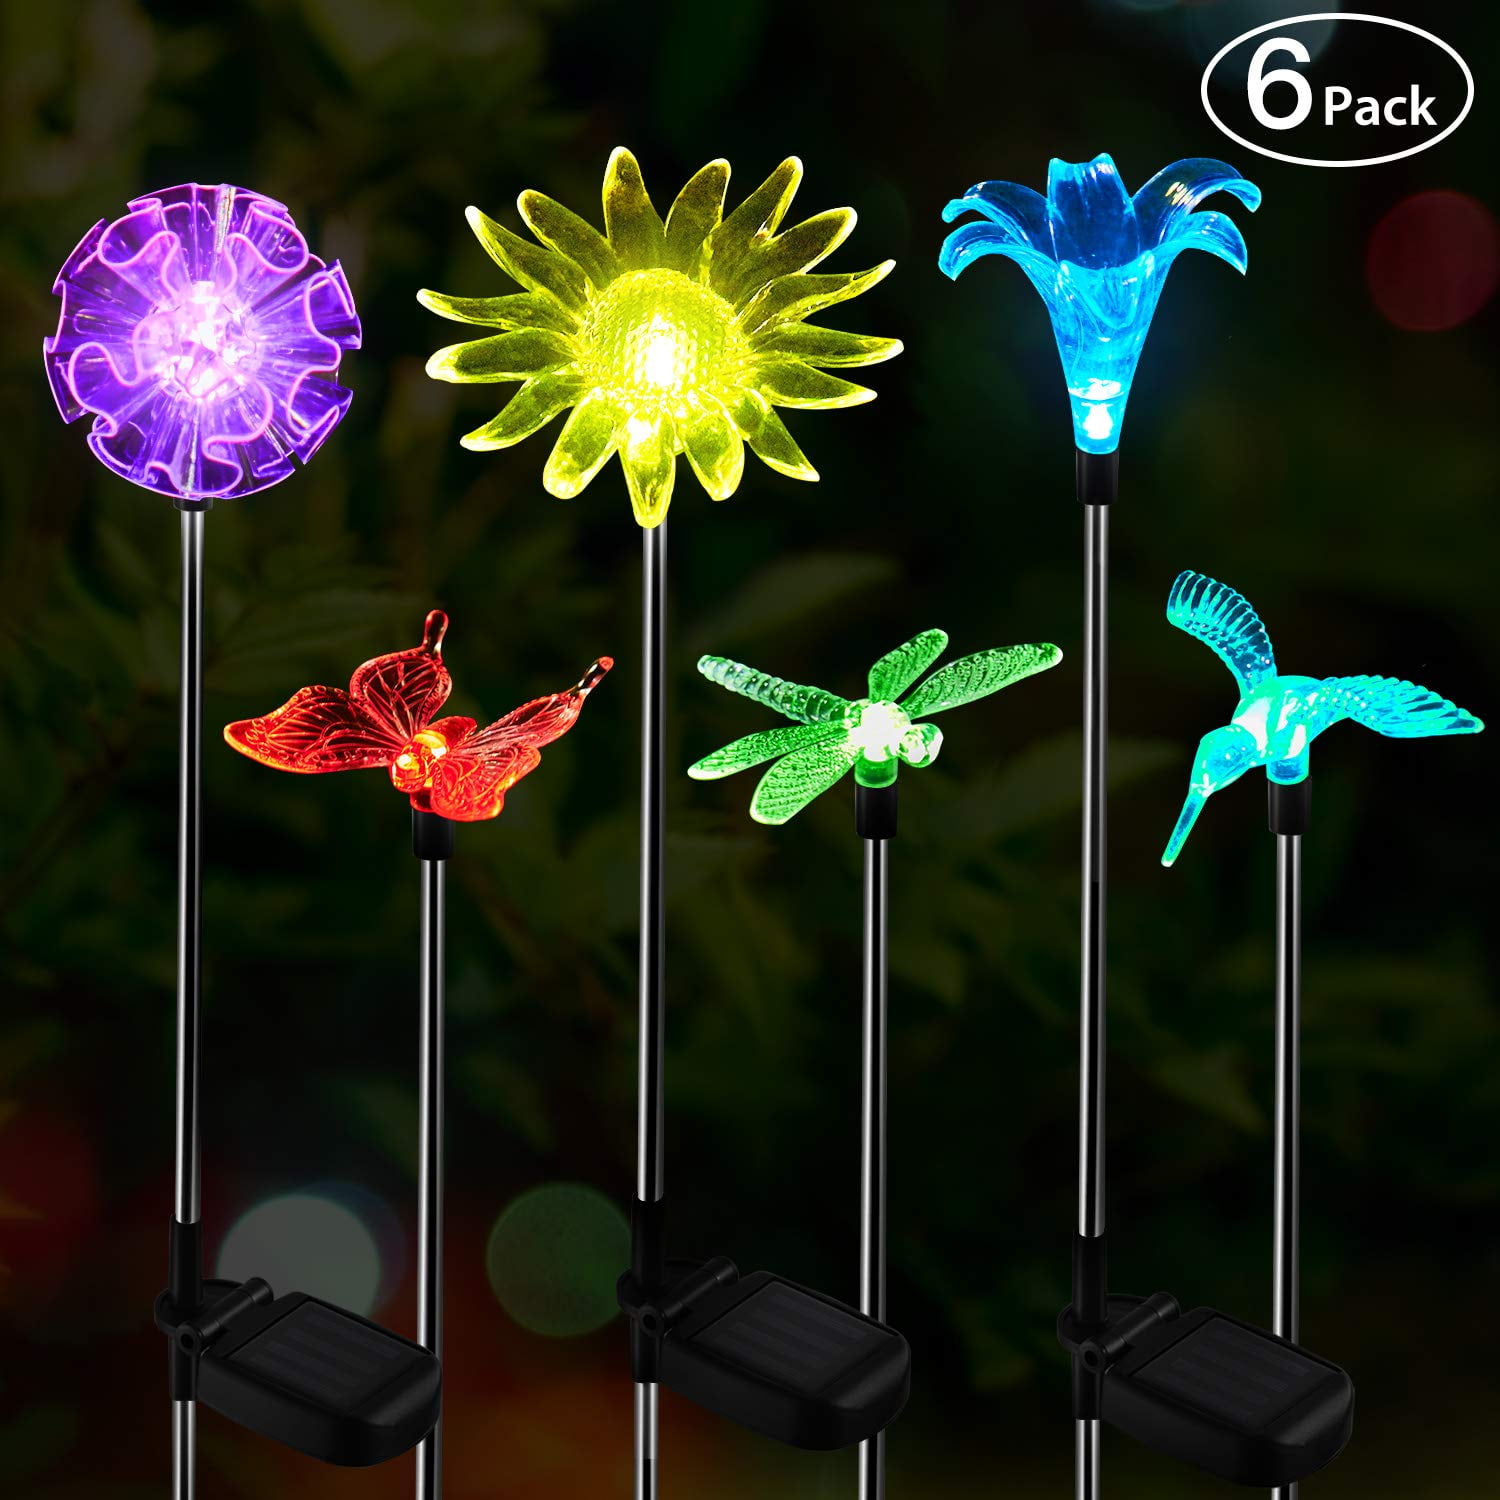 TONULAX Solar Lights Outdoor 3 Pack,Butterfly Multi-Color Changing Solar Butterfly Lights for Patio,Yard Decoration New Upgraded Solar Garden Lights Larger Solar Panel and Longer Working Time 